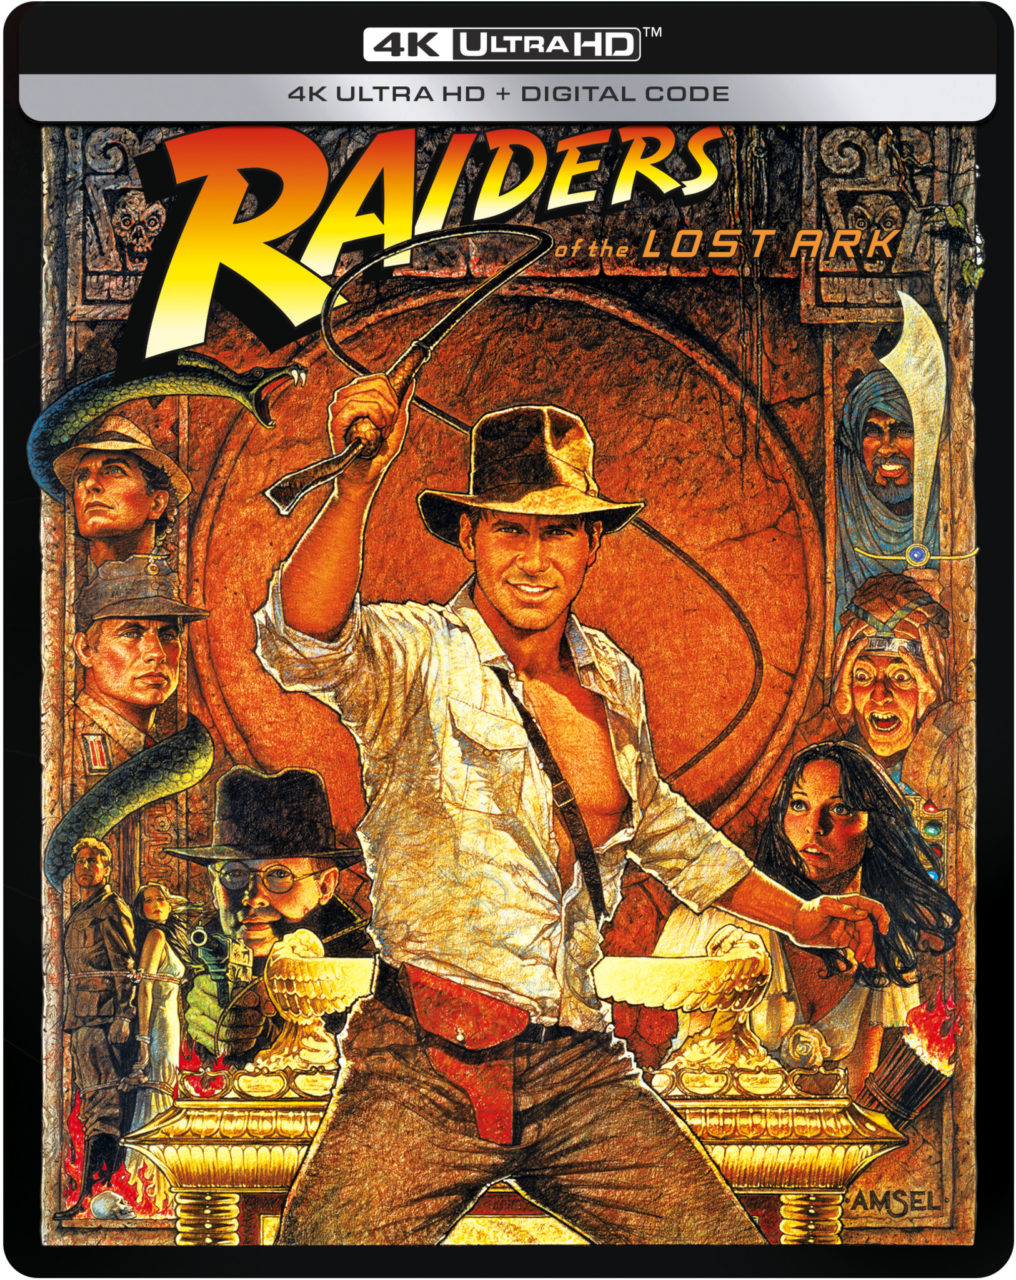 Indiana Jones: Raiders Of The Lost Ark 4K Ultra HD Combo Pack cover (Paramount Pictures)